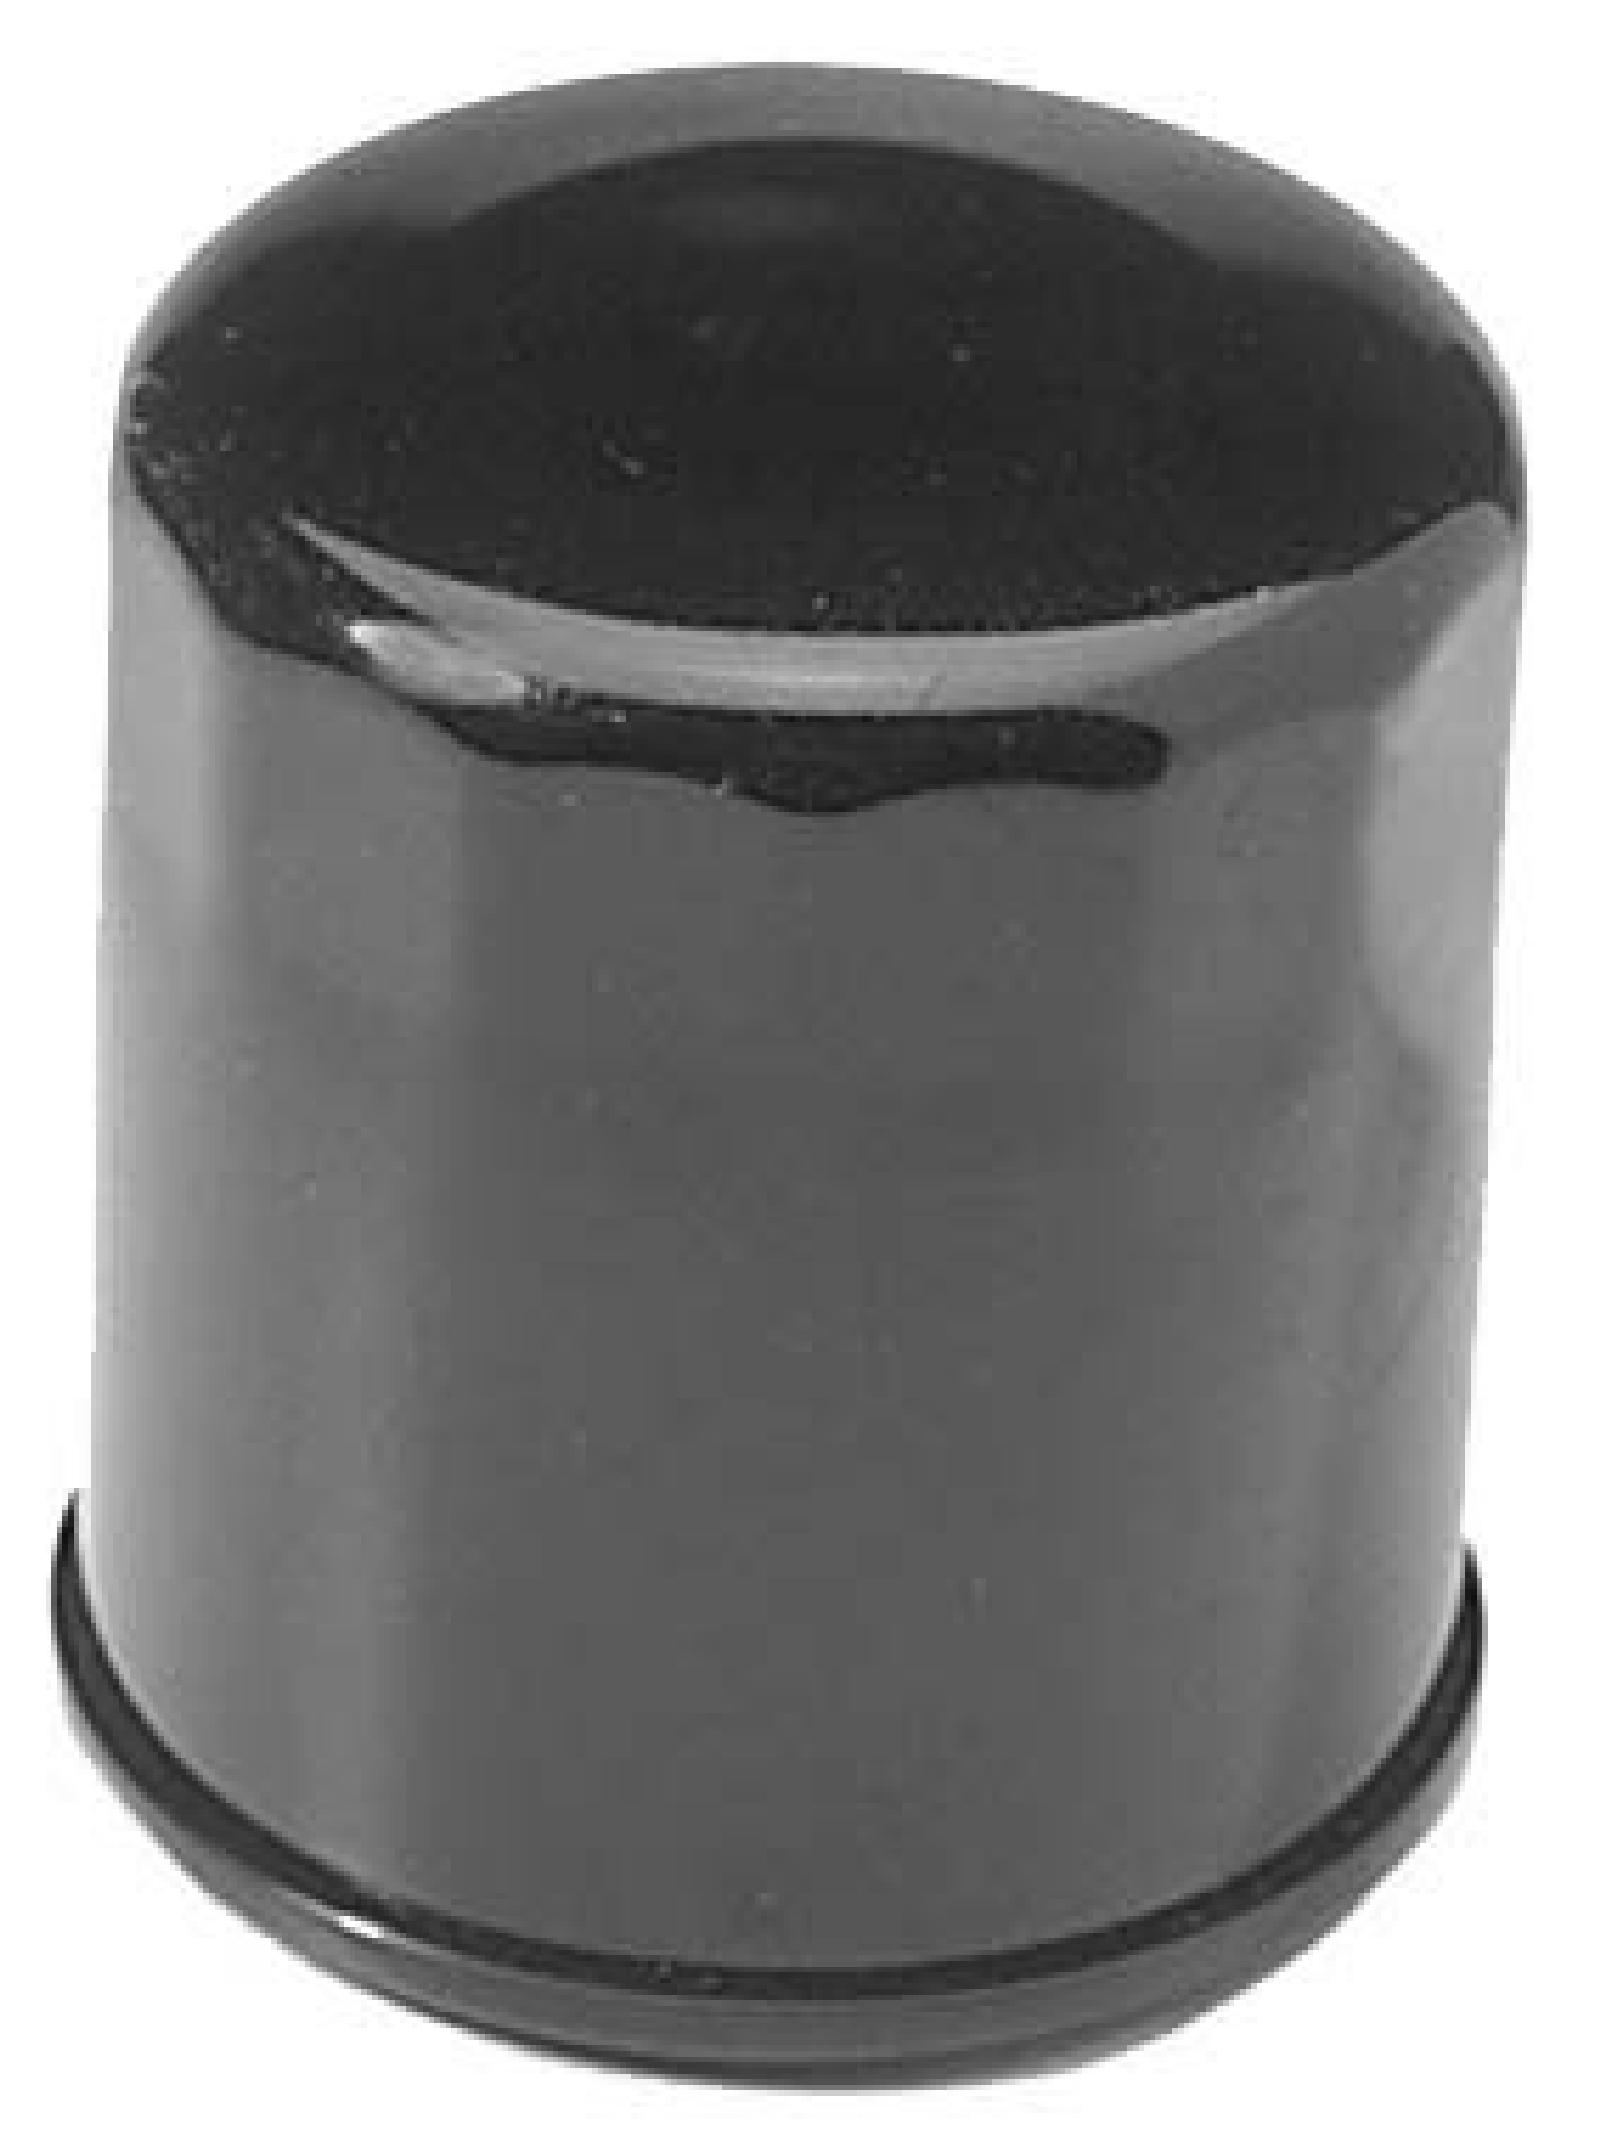 [723]OIL FILTER part# 83-000 by Oregon